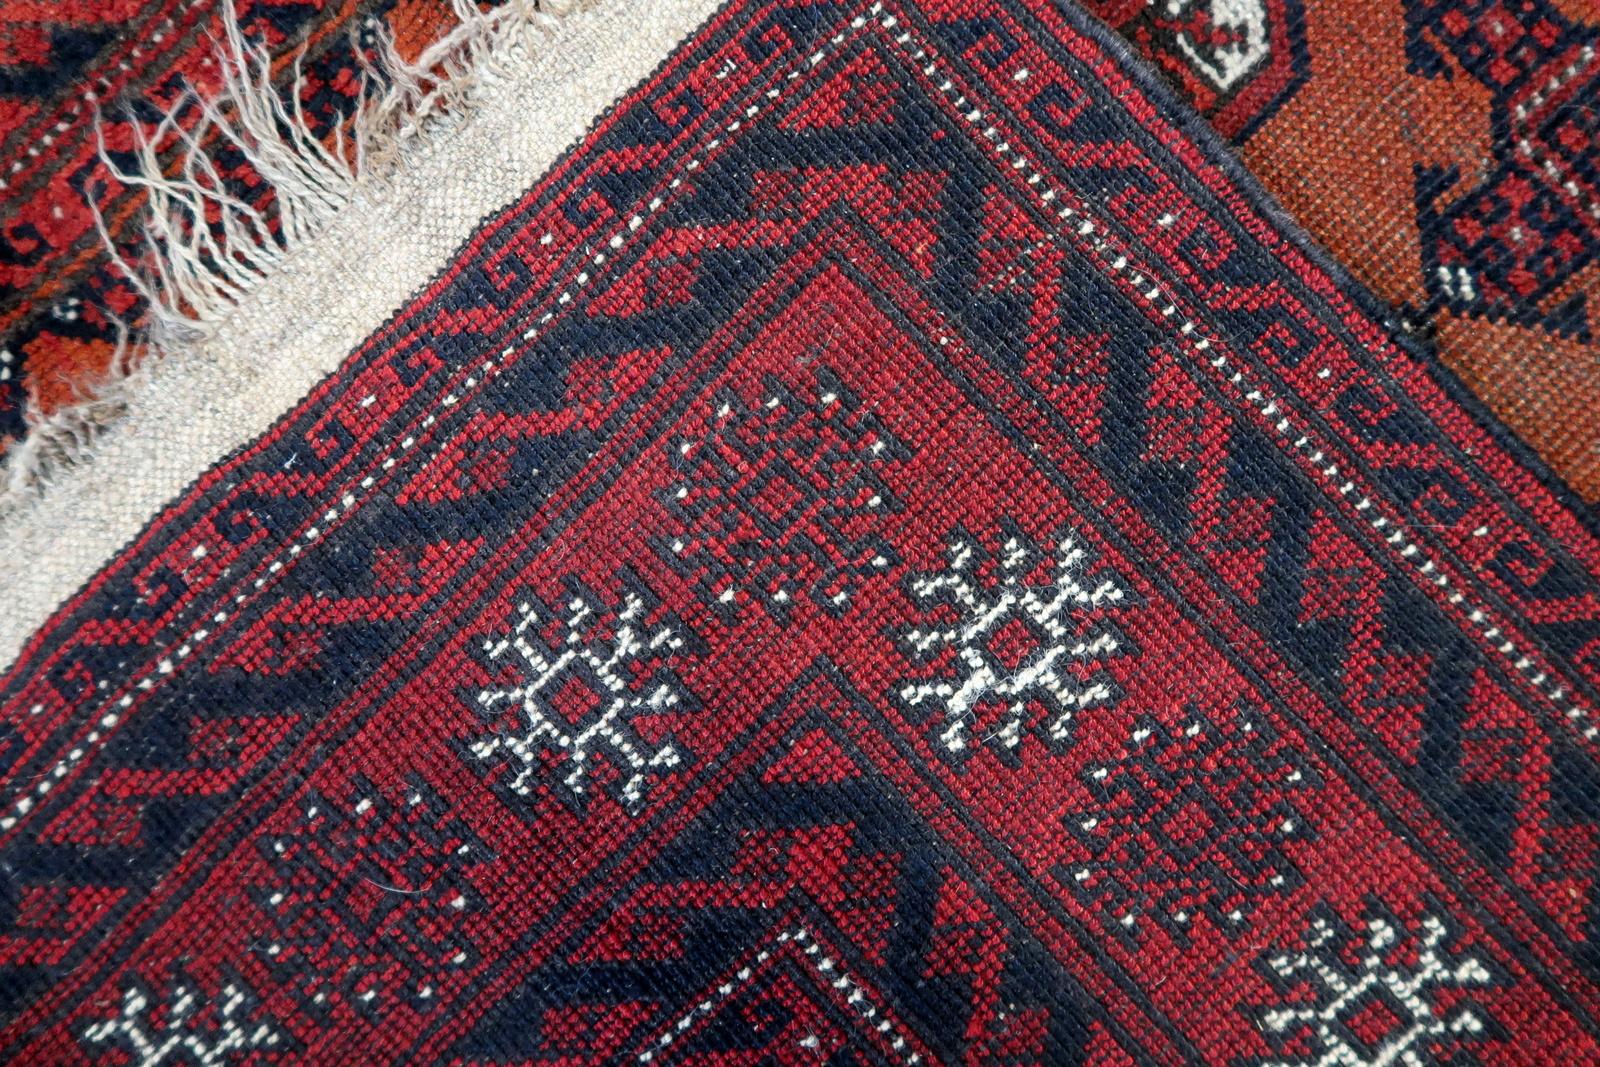 Handmade Antique Afghan Baluch Rug 3.8' x 4.8', 1920s - 1C1141 For Sale 4